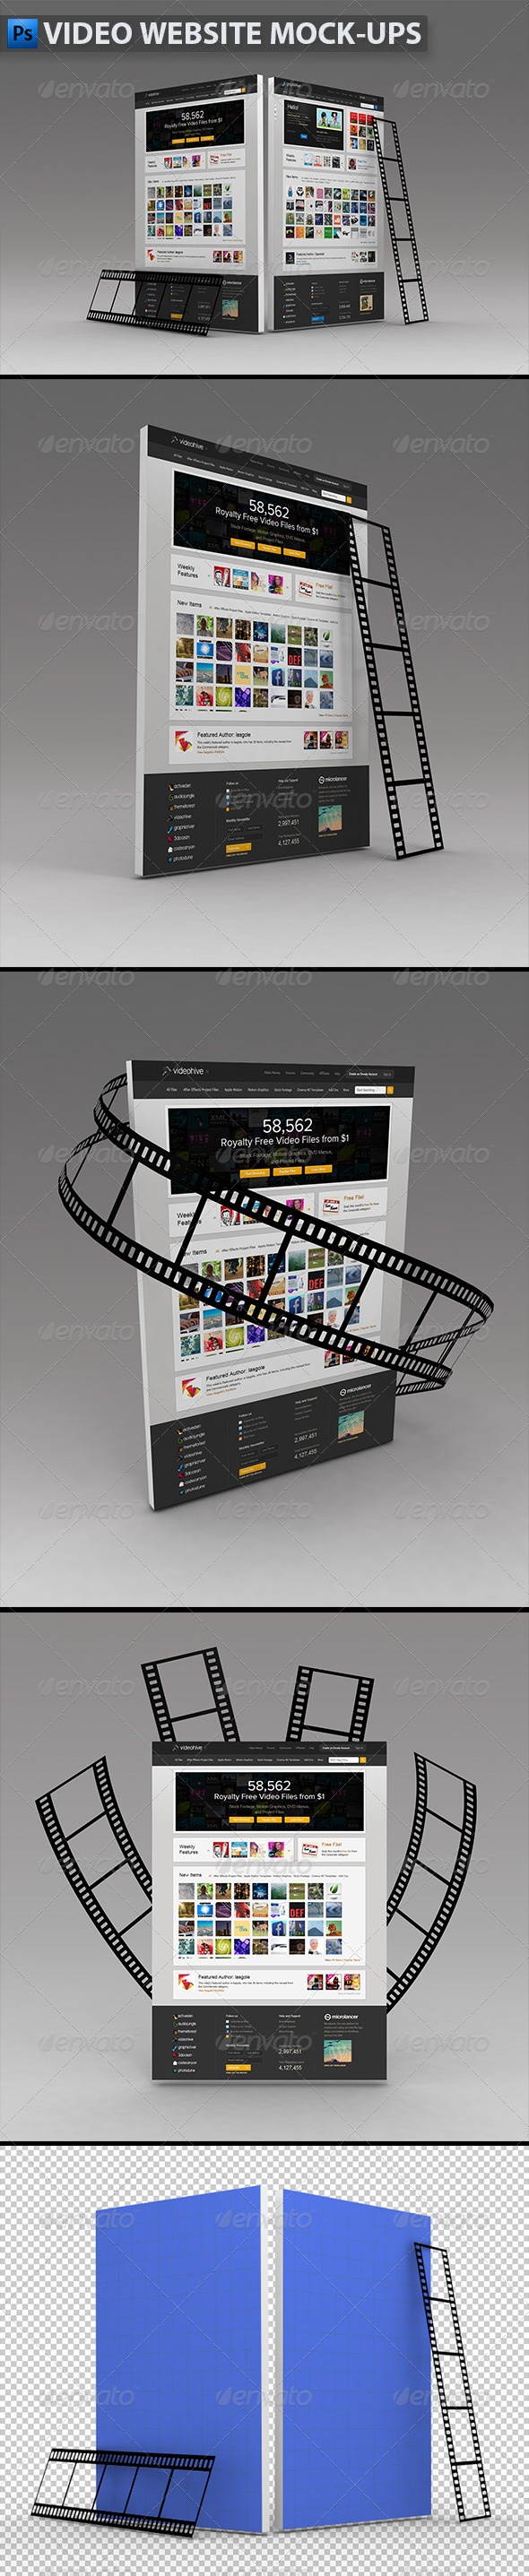 Download Video Website Mock Ups By Themedia Graphicriver